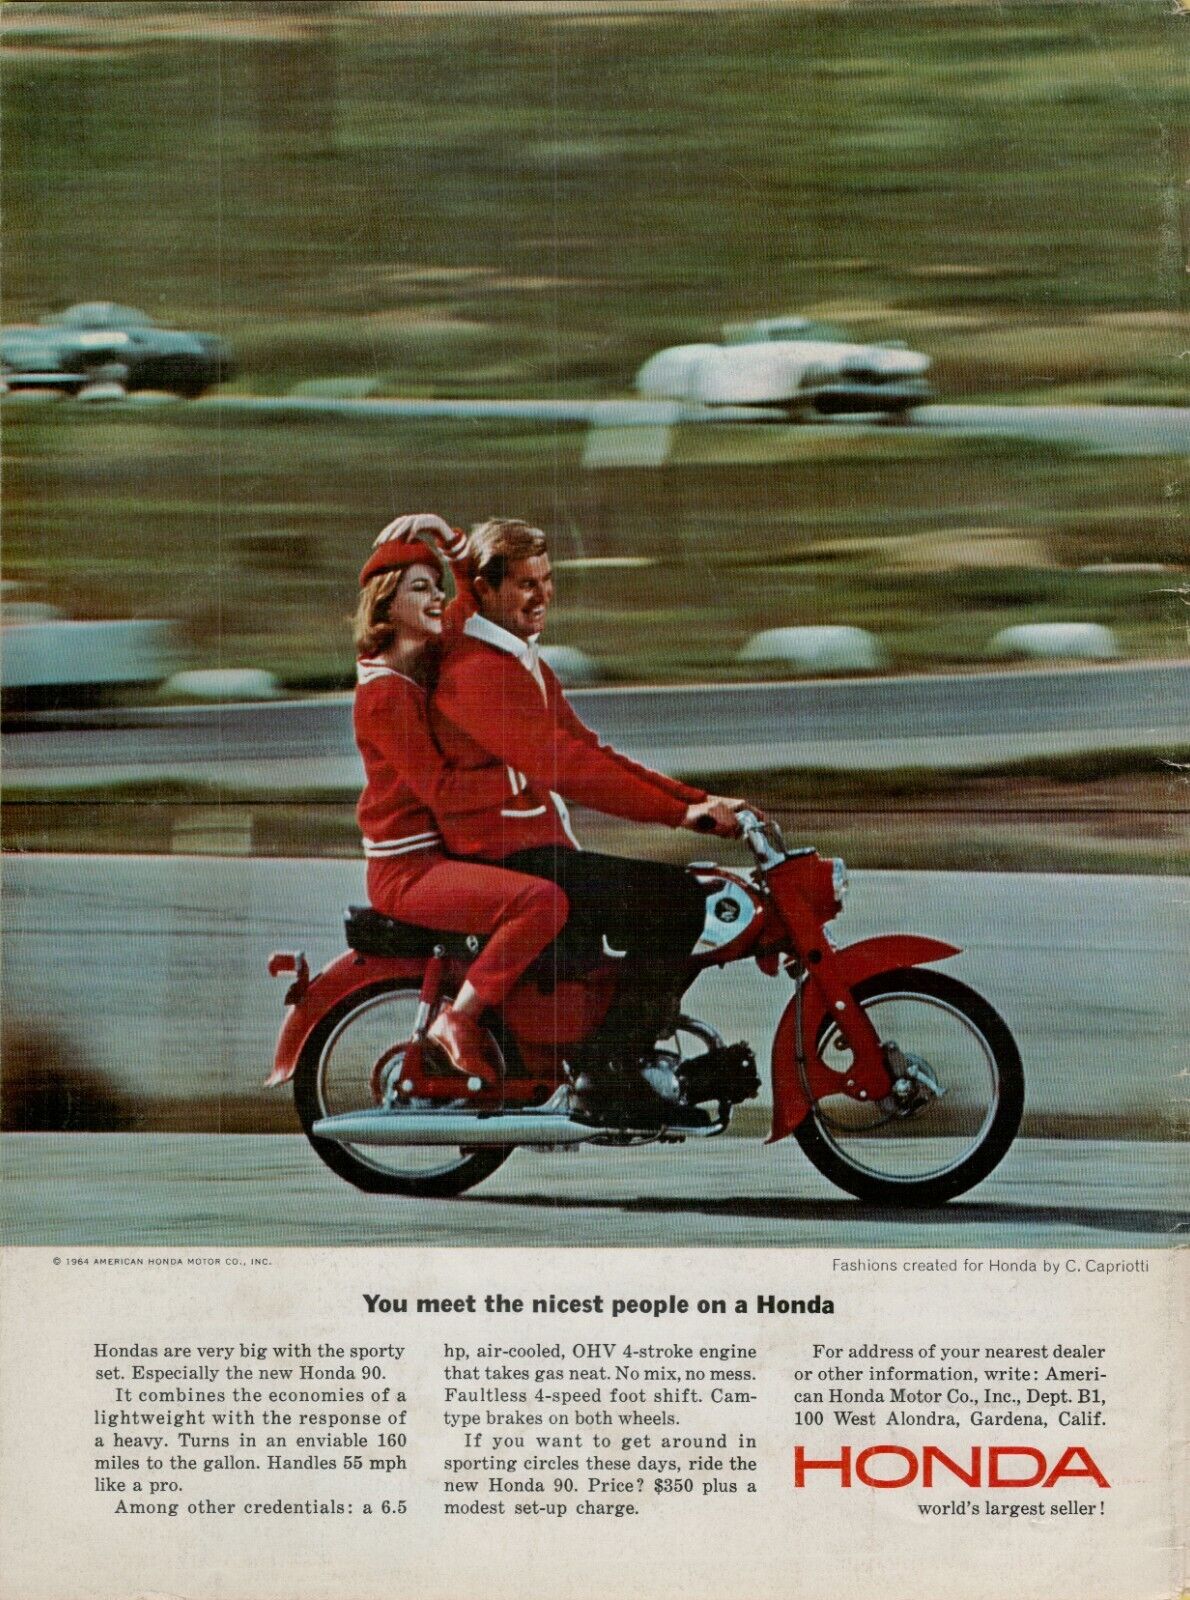 1964 Honda 90 Motorcycle Red Couple 6.5hp Capriotti Fashion  Vintage PRINT AD